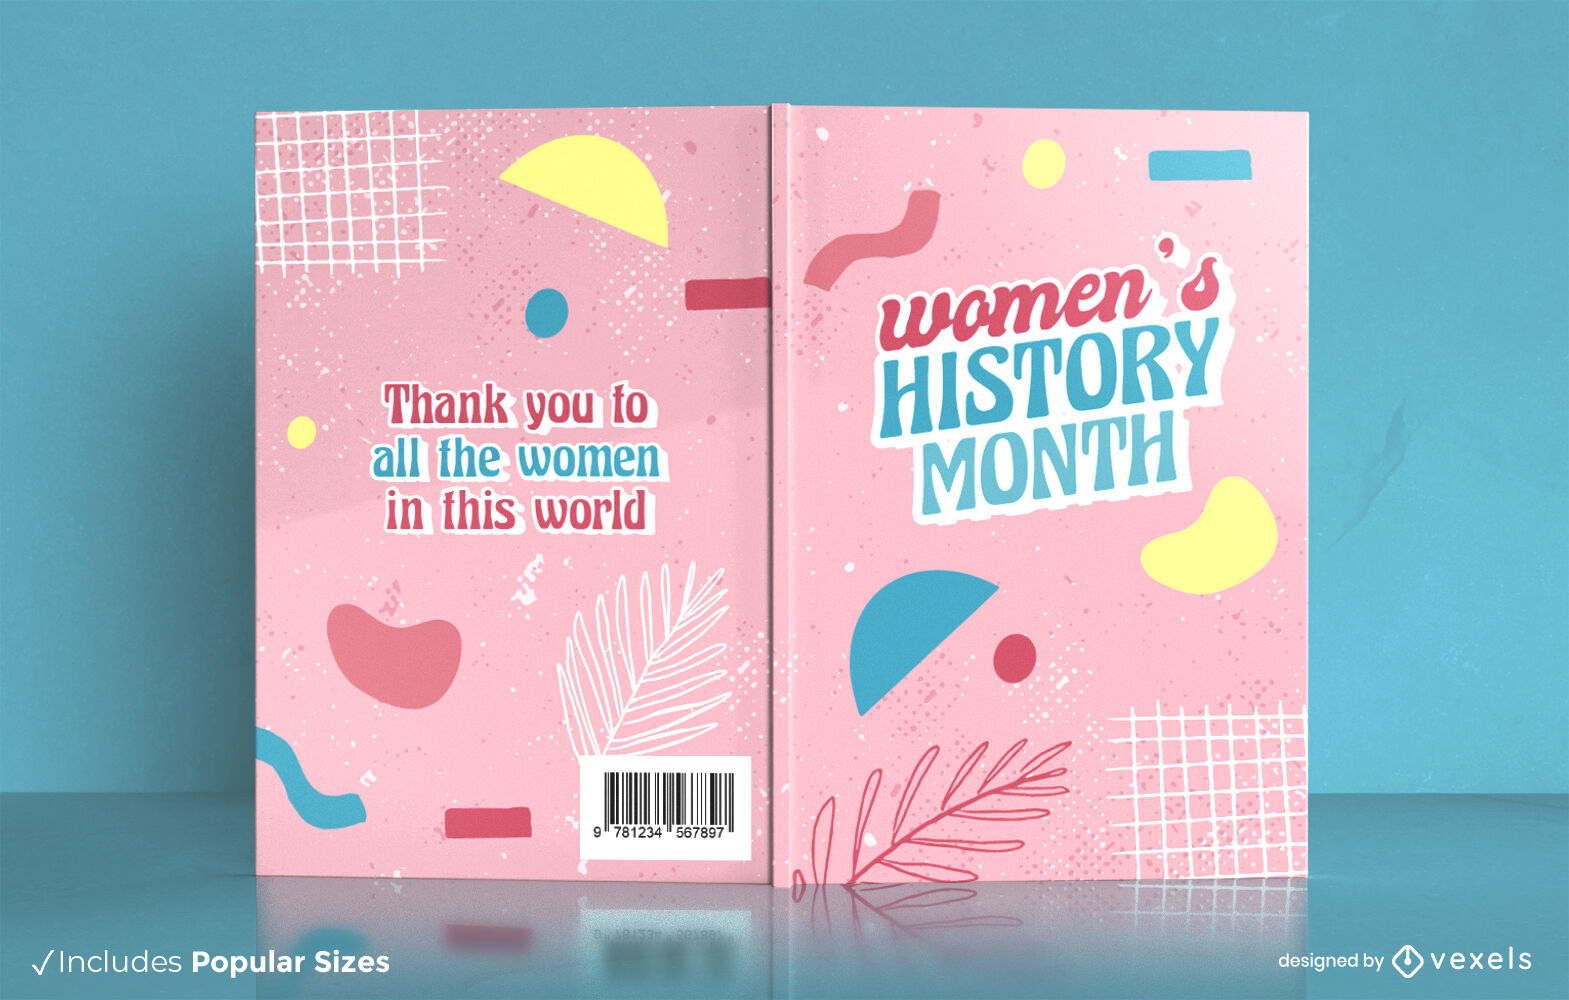 Womens history month abstract book cover design